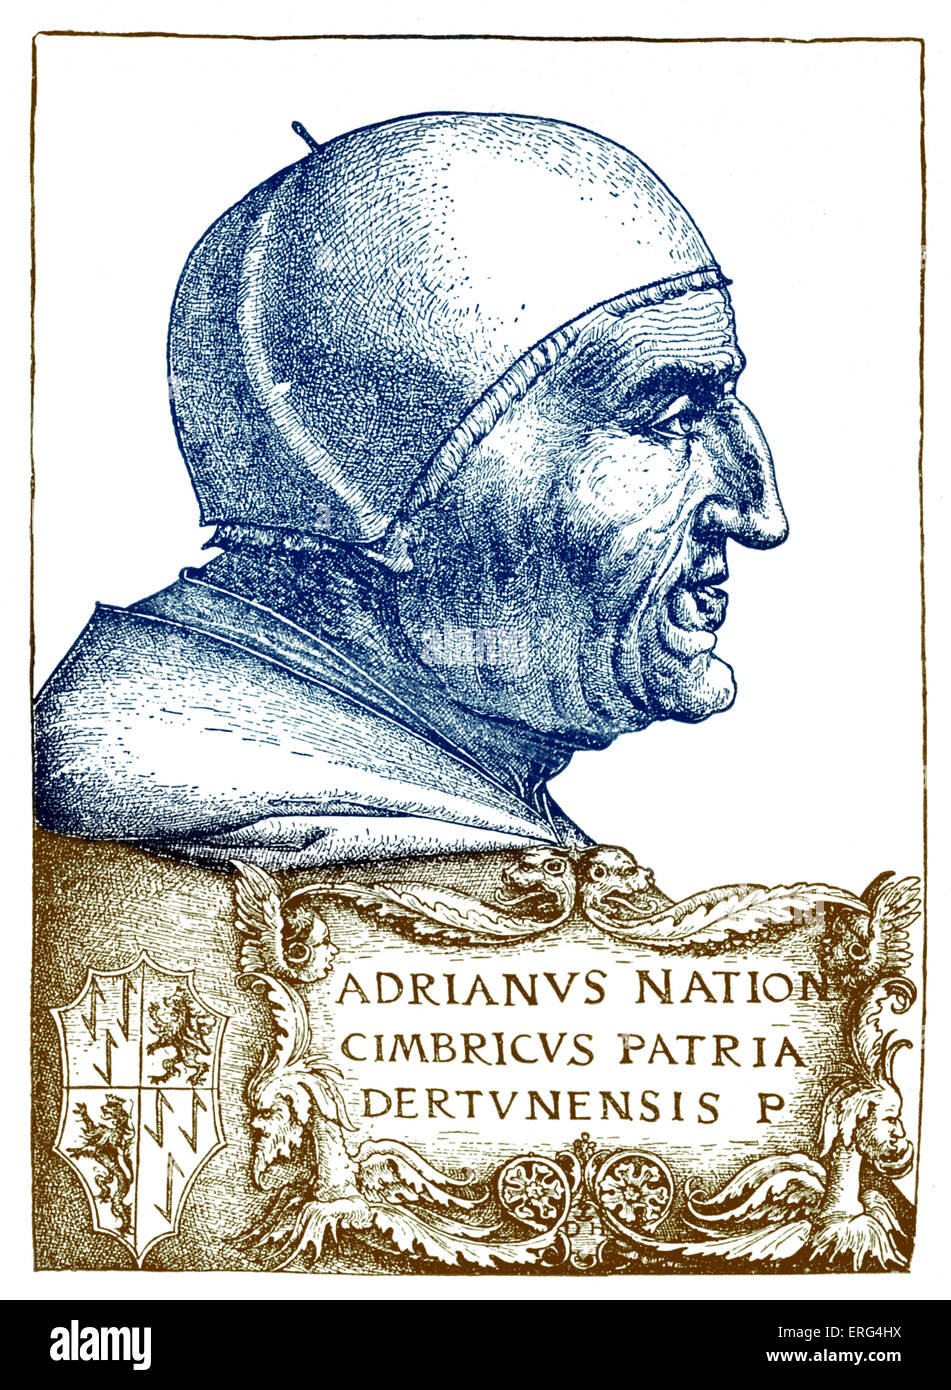 Pope Adrian VI, born Adriaan Florenszoon Bowyens  2 March 1459 - 14 September 1523.  Copperplate engraving by Daniel Hopfer. Stock Photo